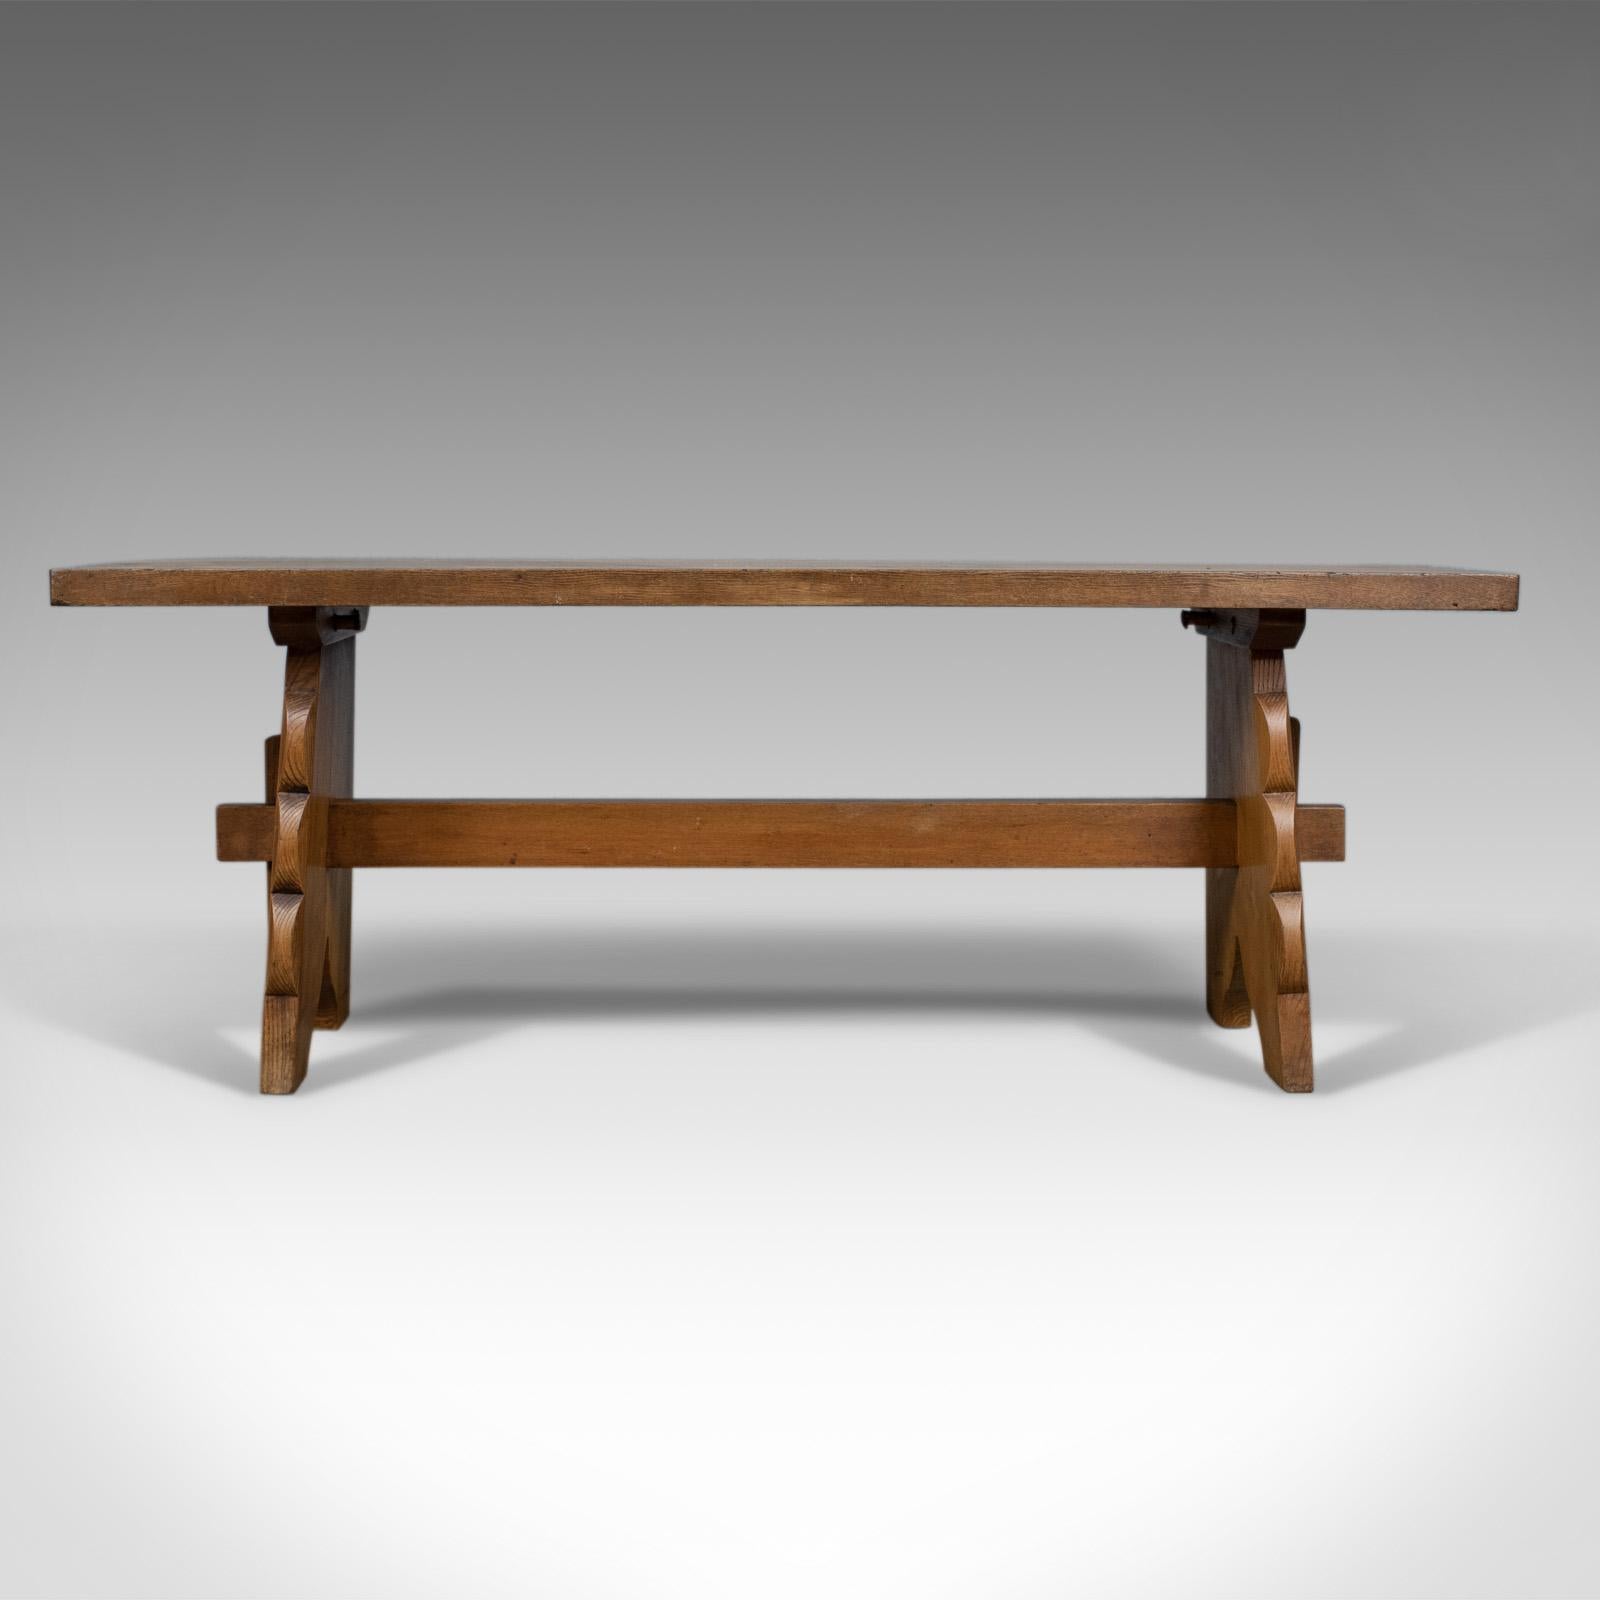 This is an Arts & Crafts oak bench, an English, early 20th century, two-seat form.

Crafted in select oak
Displaying good grain detail in a wax polished finish
In good proportion, solid, stable and practical
Modestly decorated with curved